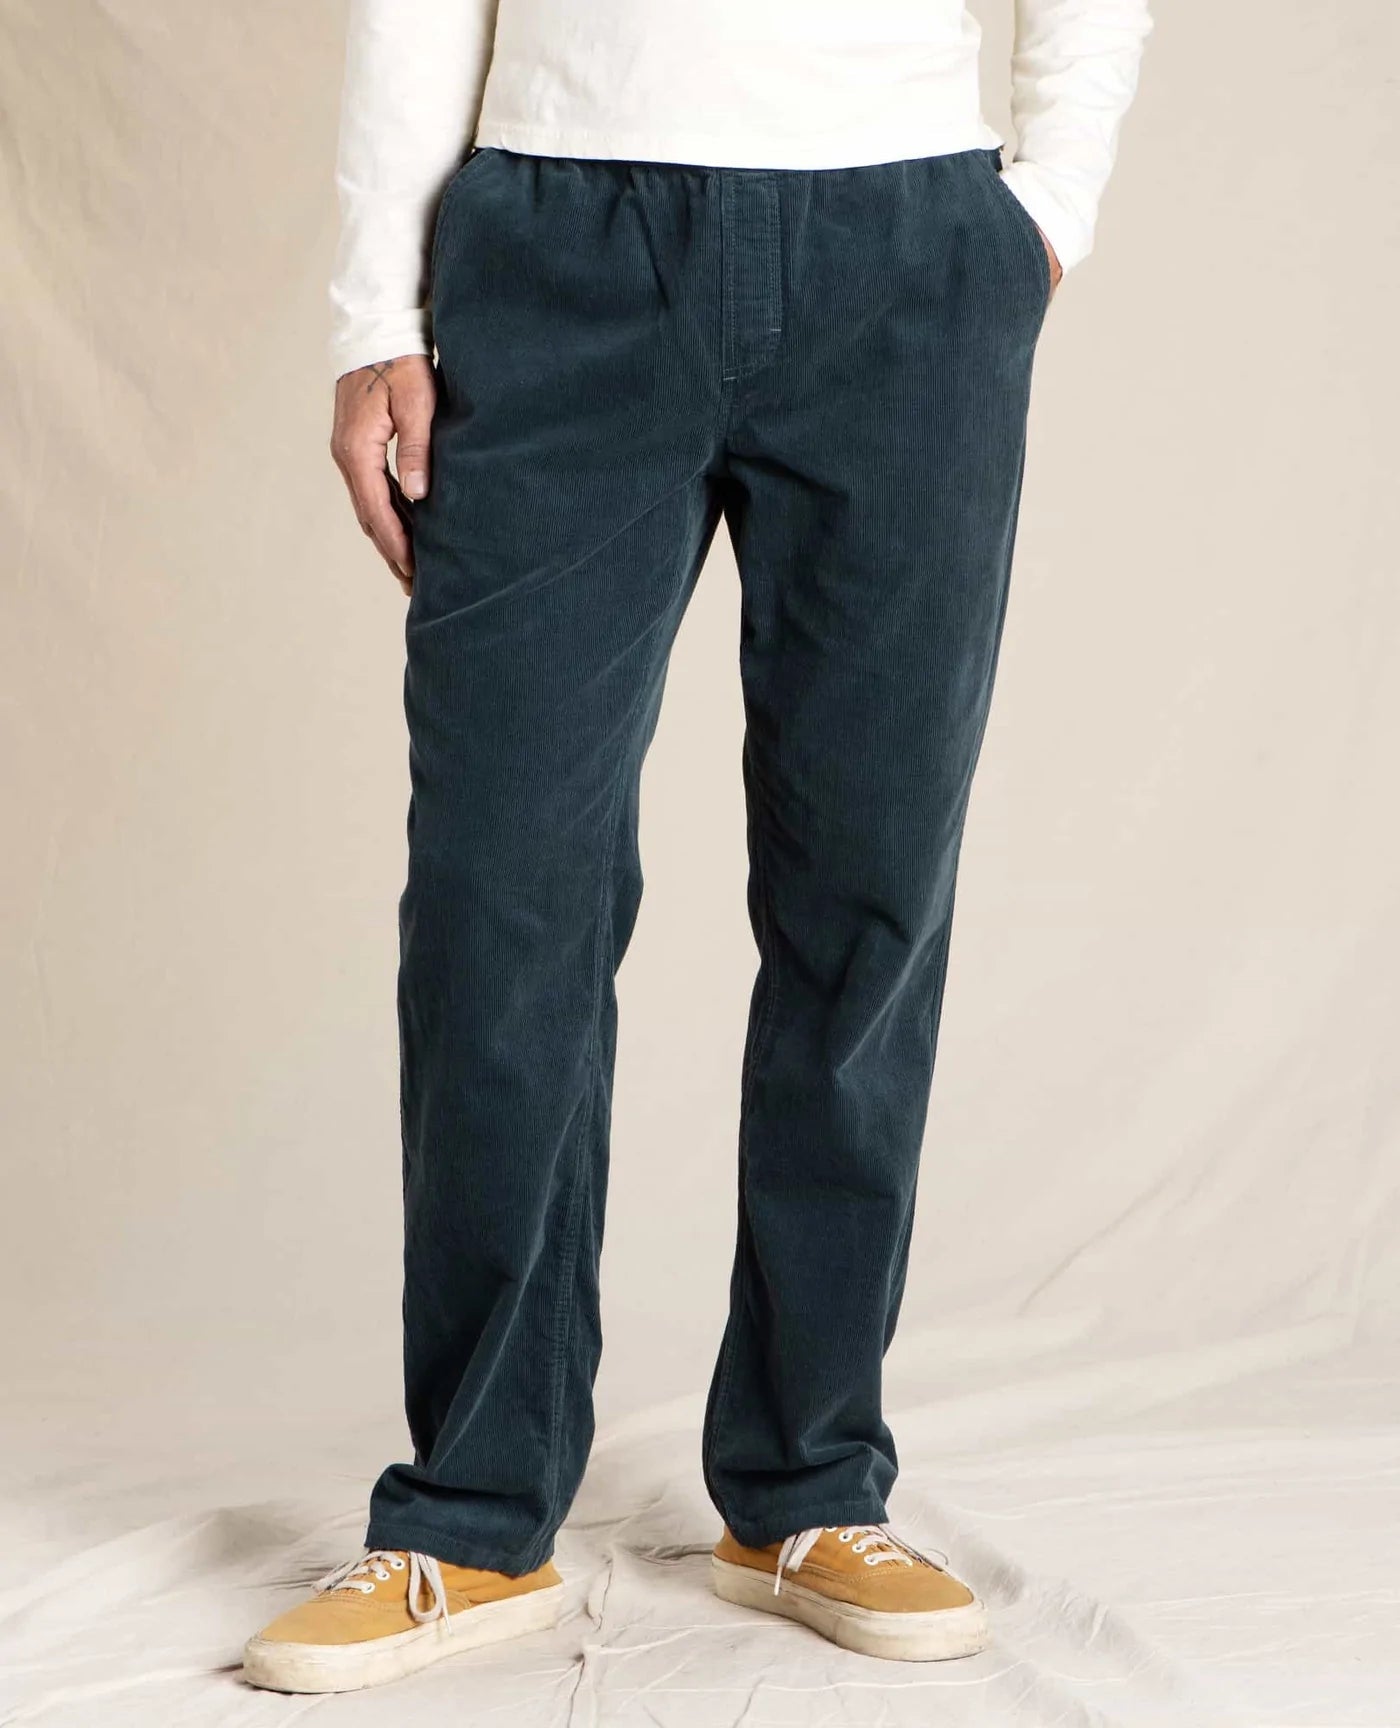 Toad & Co. - Scouter Cord Pull-On Pant